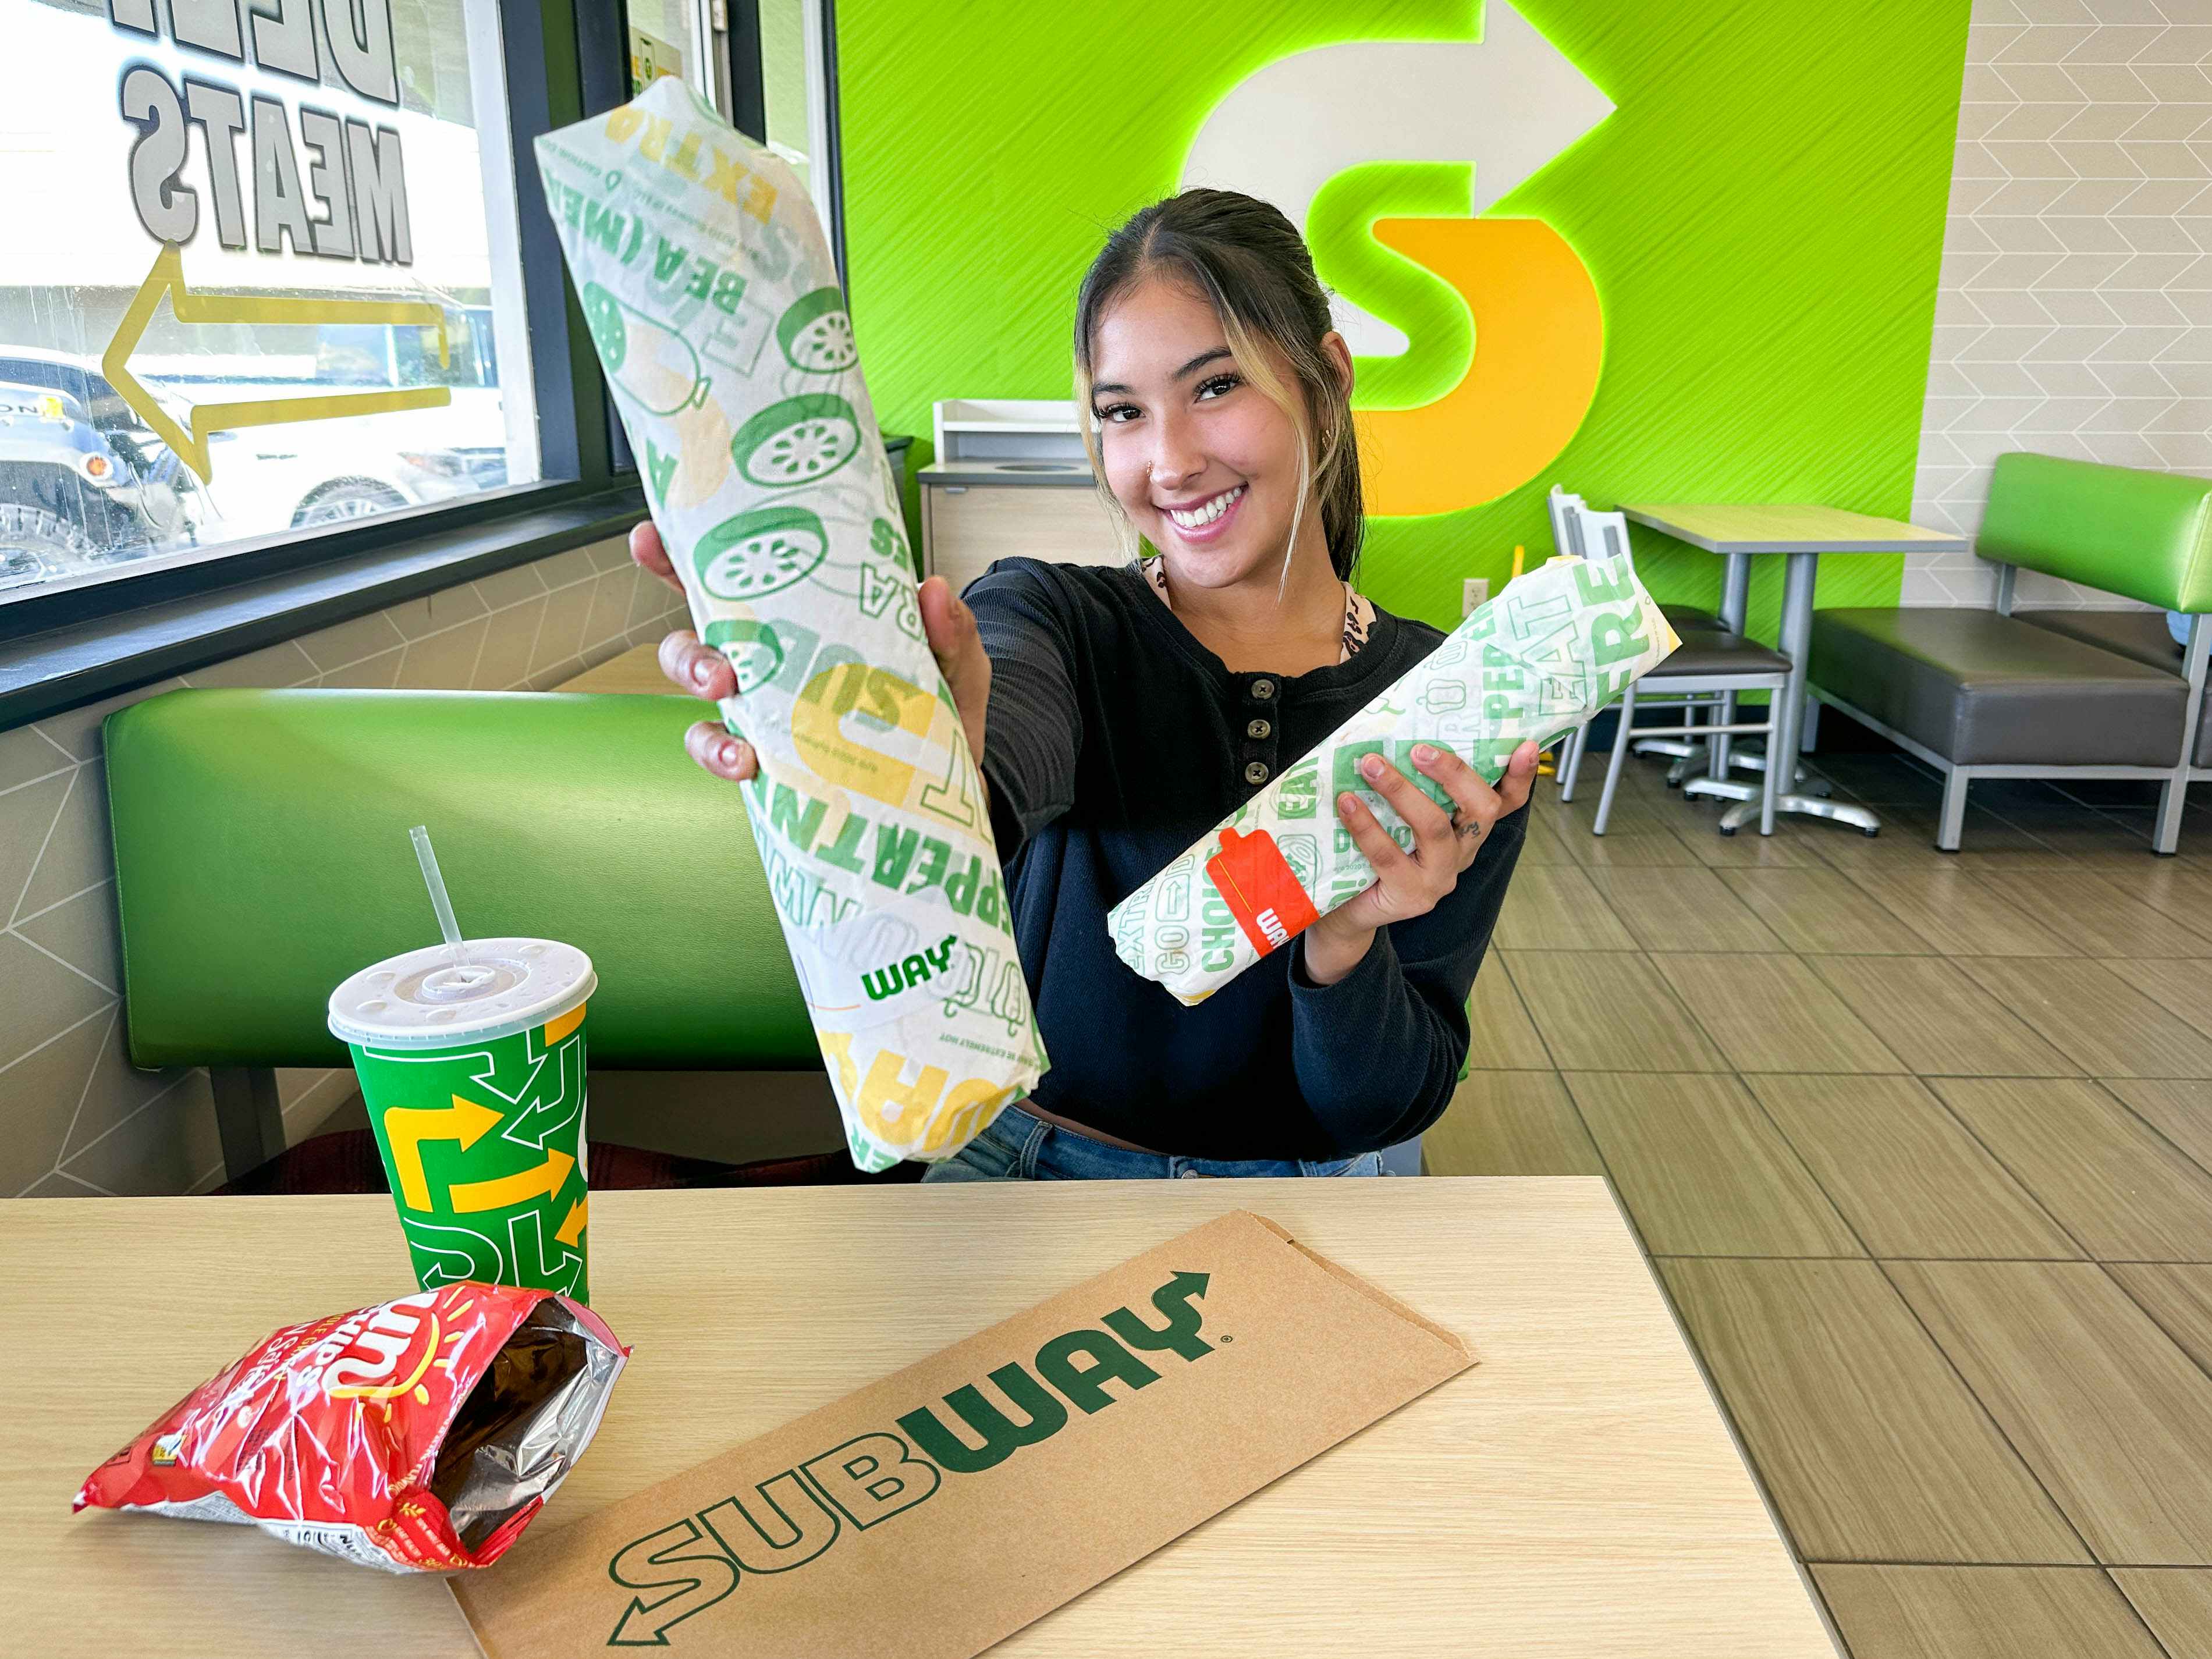 a woman holding out subway sandwiches